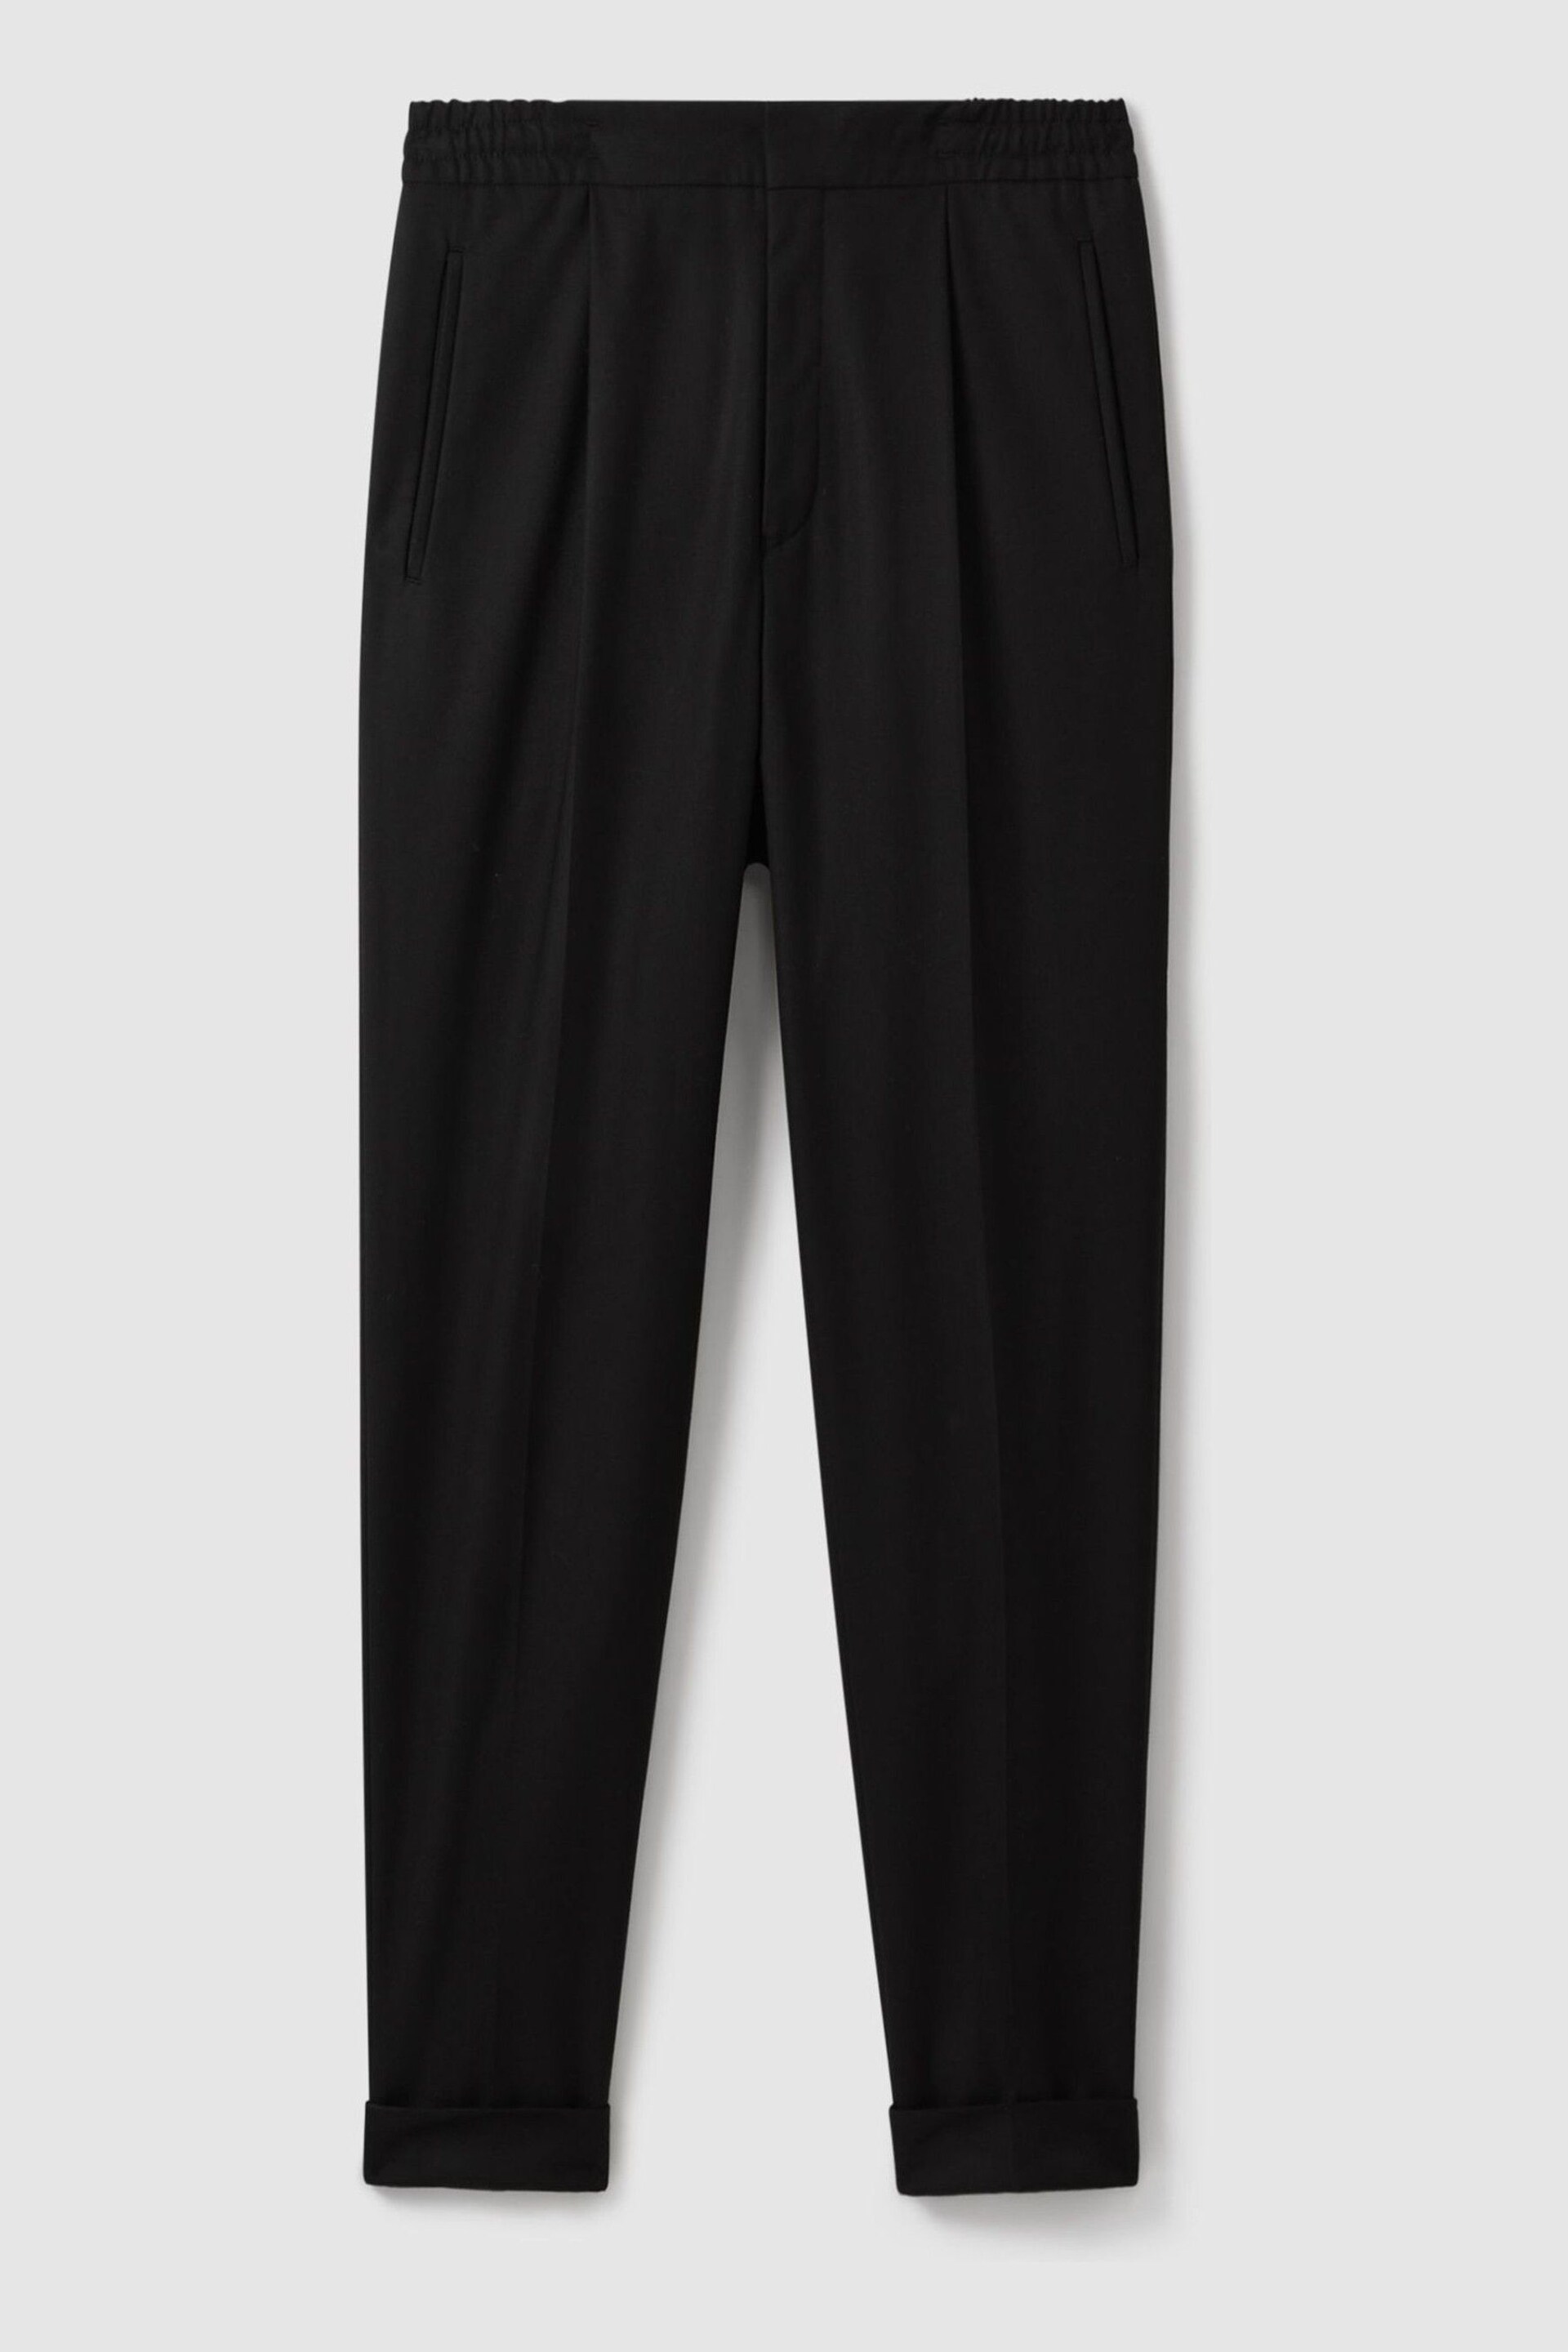 Reiss Black Brighton Relaxed Drawstring Trousers with Turn-Ups - Image 2 of 6